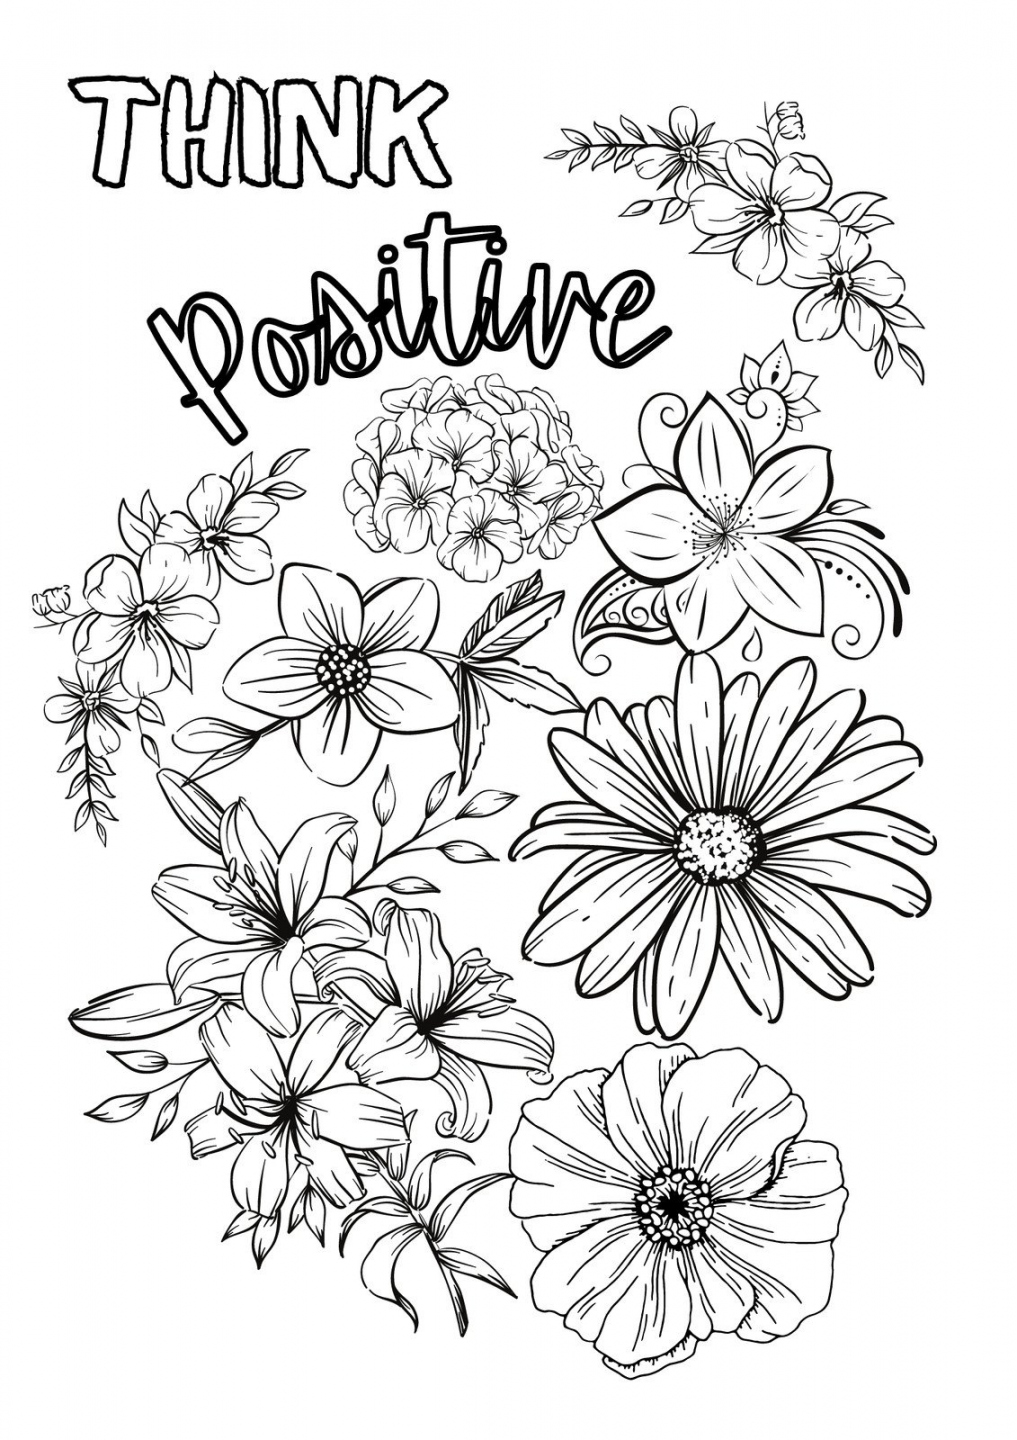 Free Printable Coloring Pictures - Printable - Free printable coloring page templates to customize  Canva